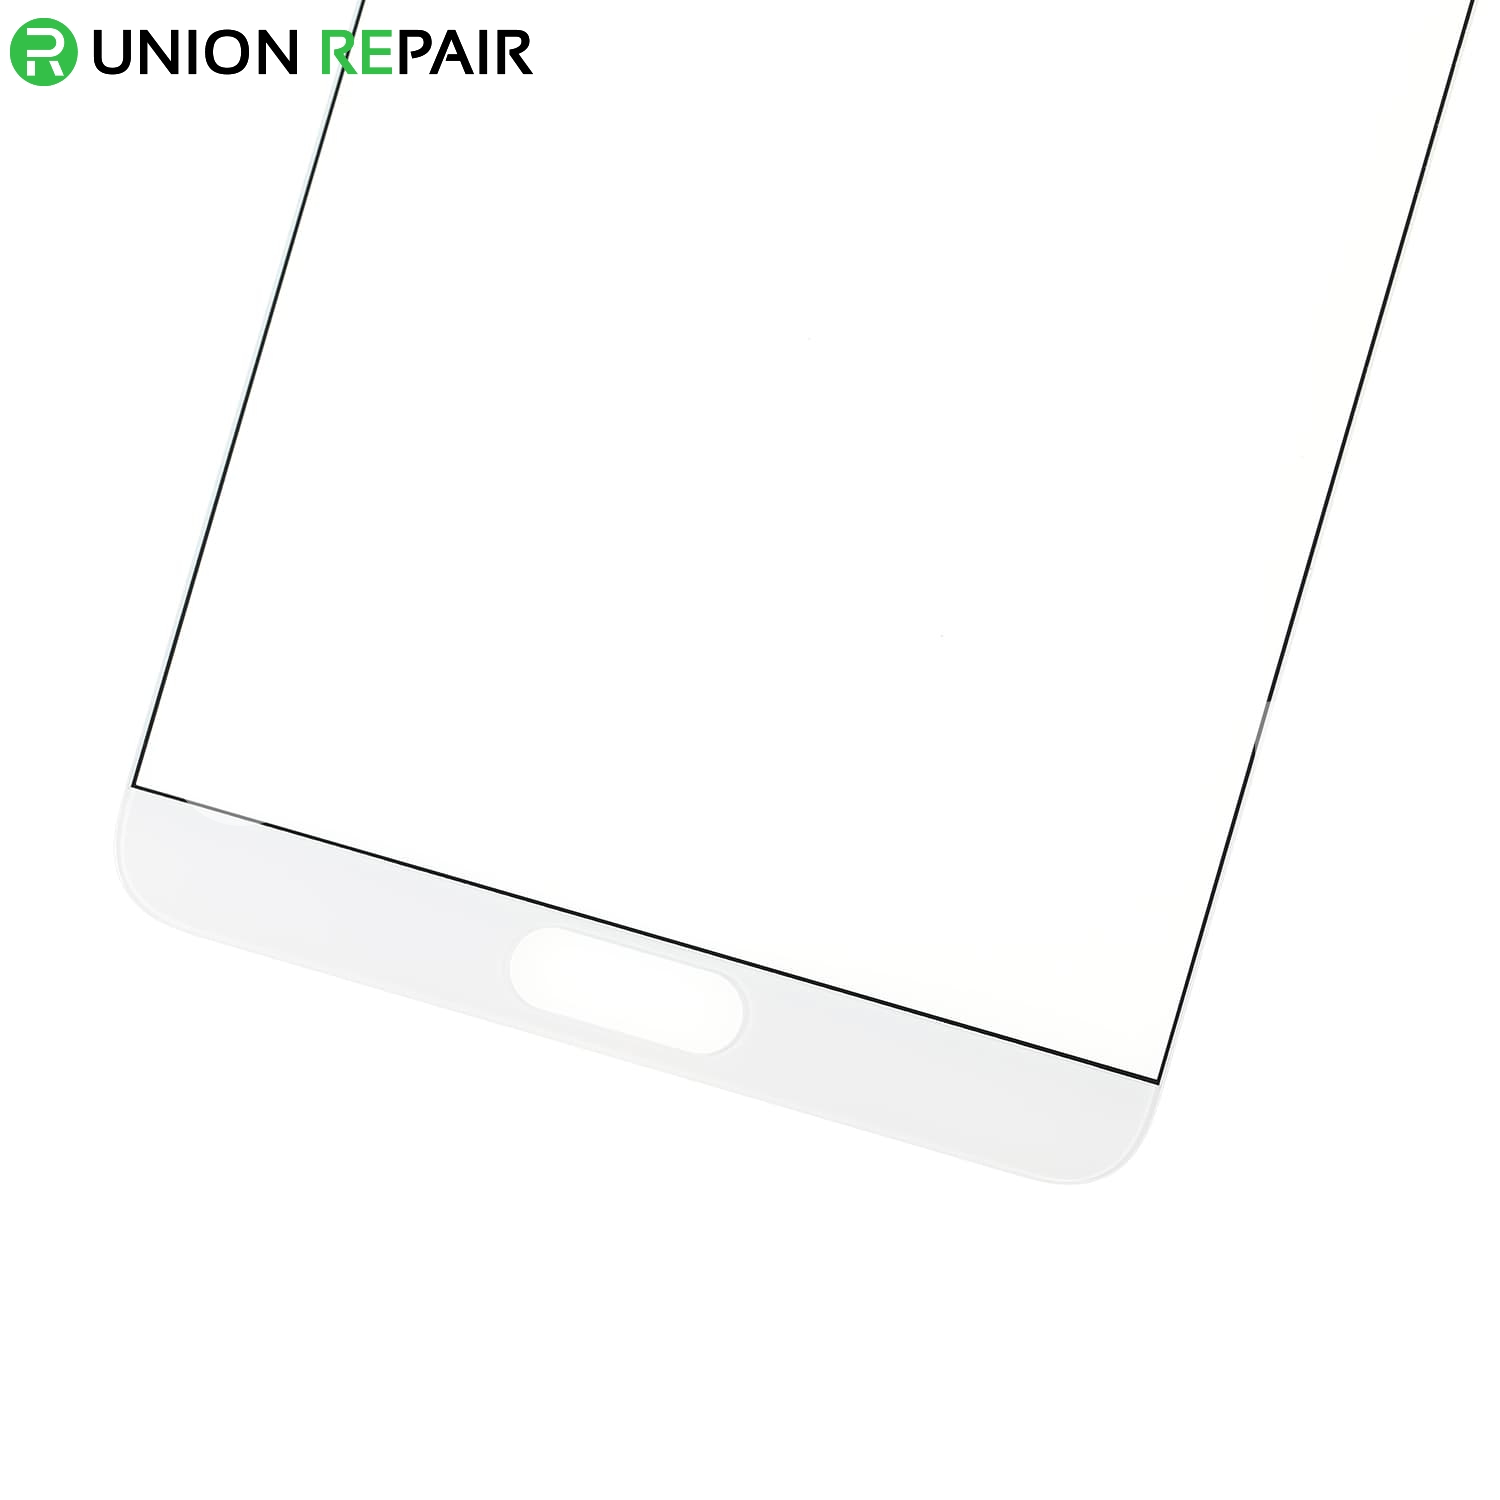 Replacement for Huawei Mate 10 Front Glass - WhiteReplacement for Huawei Mate 10 Front Glass - White